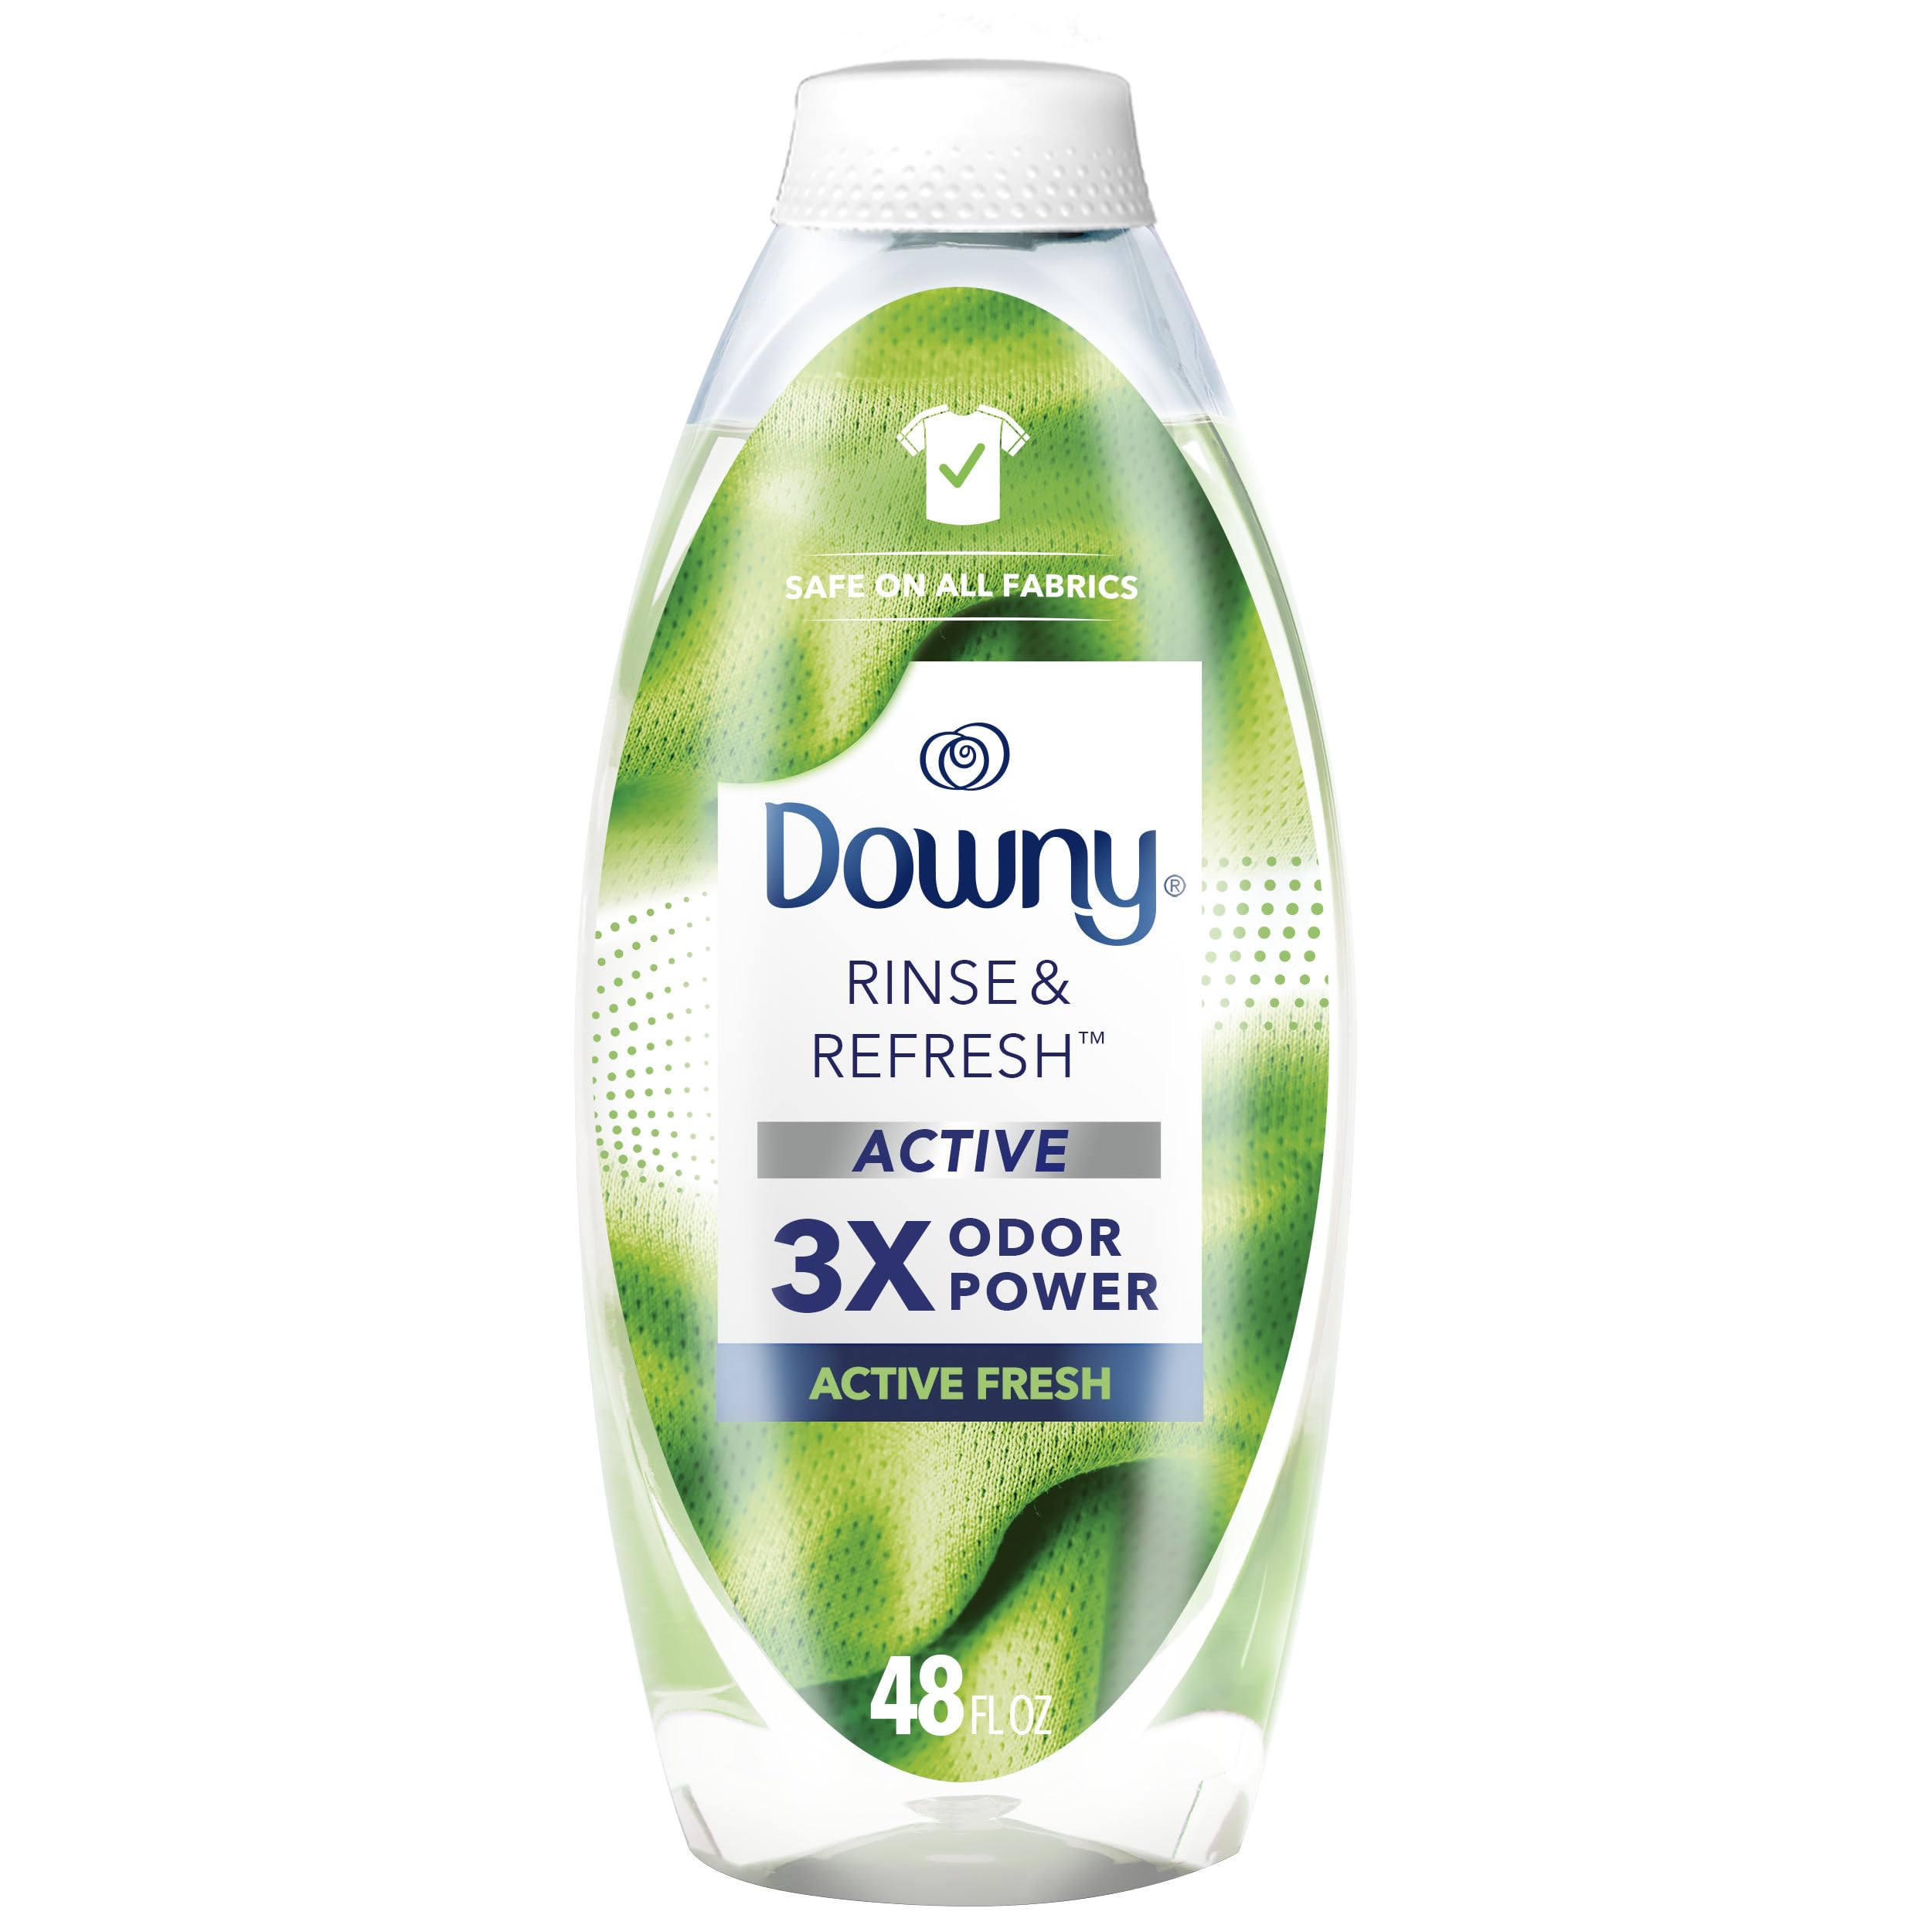 Downy RINSE & REFRESH Laundry Odor Remover & Fabric Softener for Activewear 48 oz x4 Amazon S&S $31.96